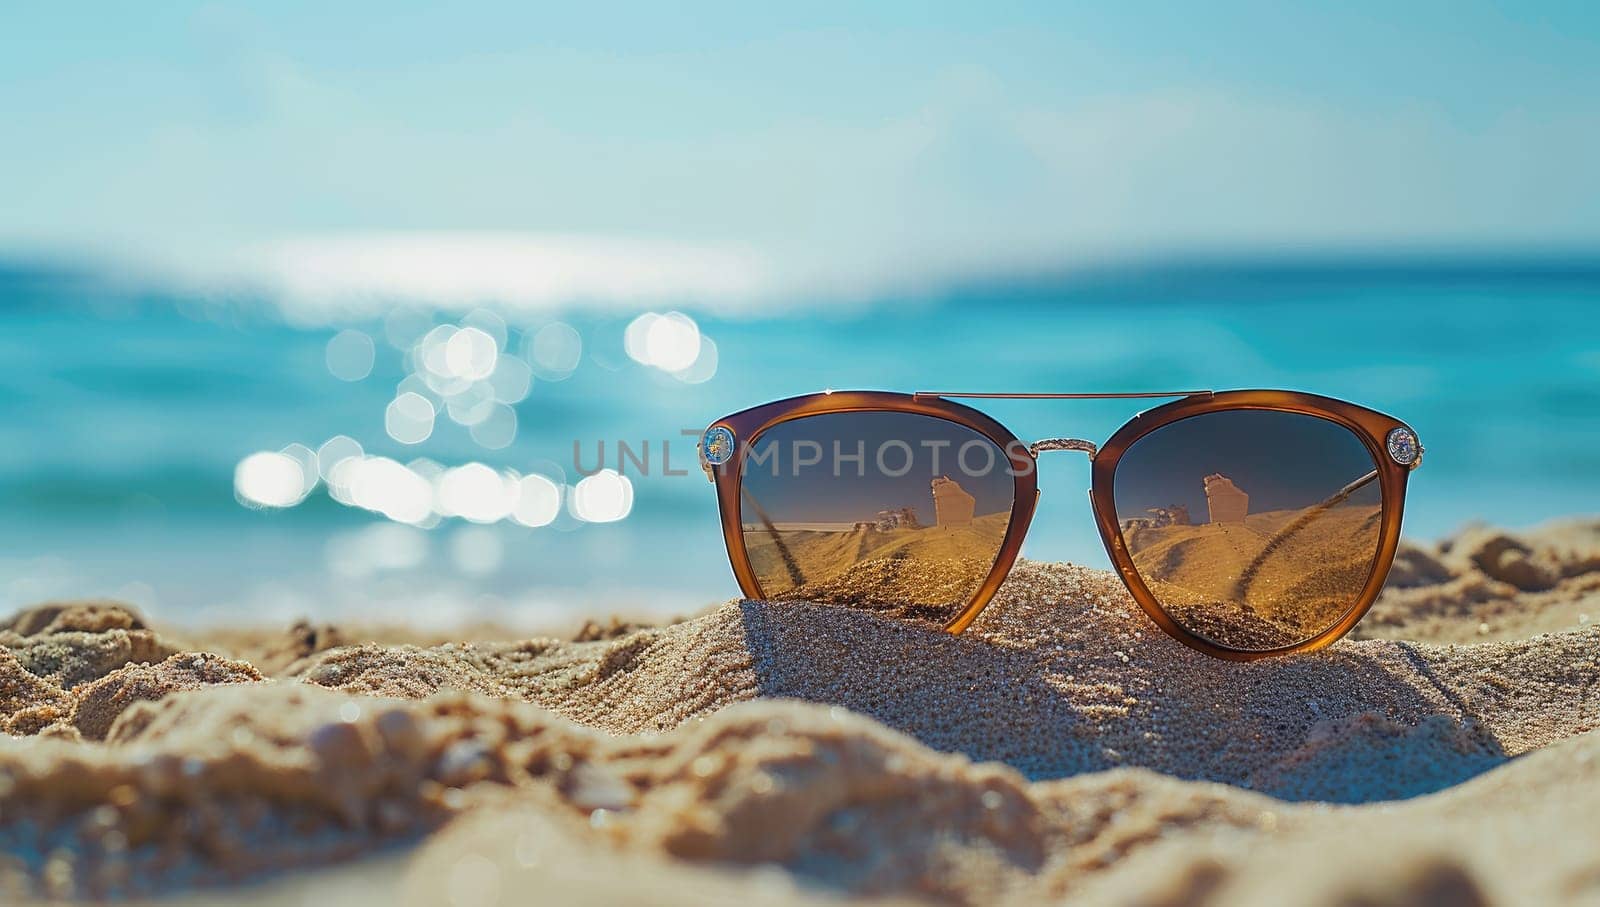 Sunglasses resting on sandy beach with ocean backdrop by ailike